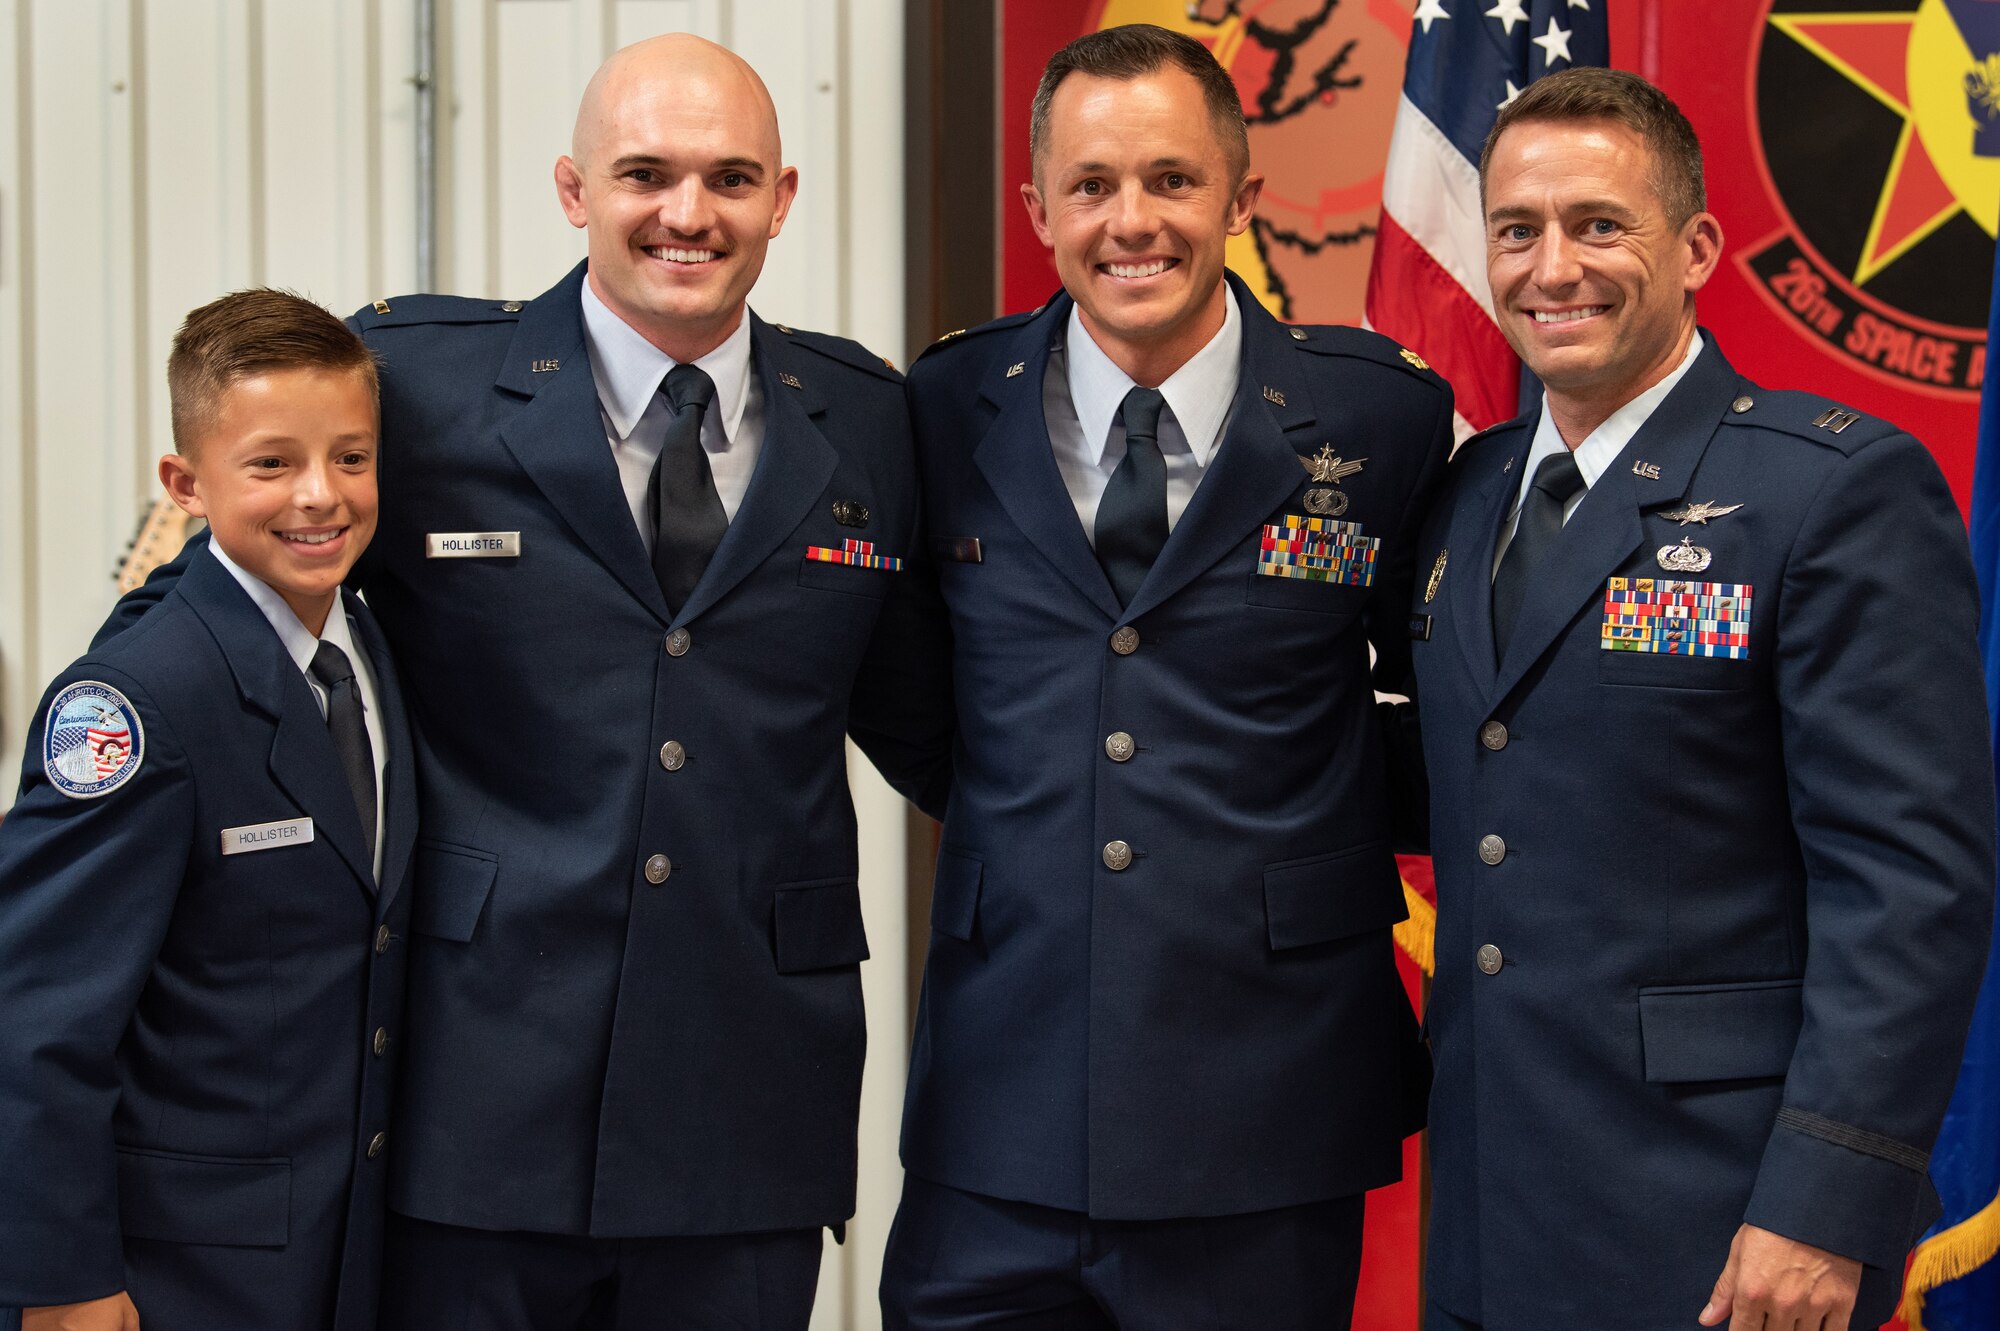 The three Hollister brothers, Taylor (second from left), Scott (middle), Ryan and Scott’s son, Trey (left), pose for a photo together during Scott’s promotion ceremony Sept. 8, 2019.